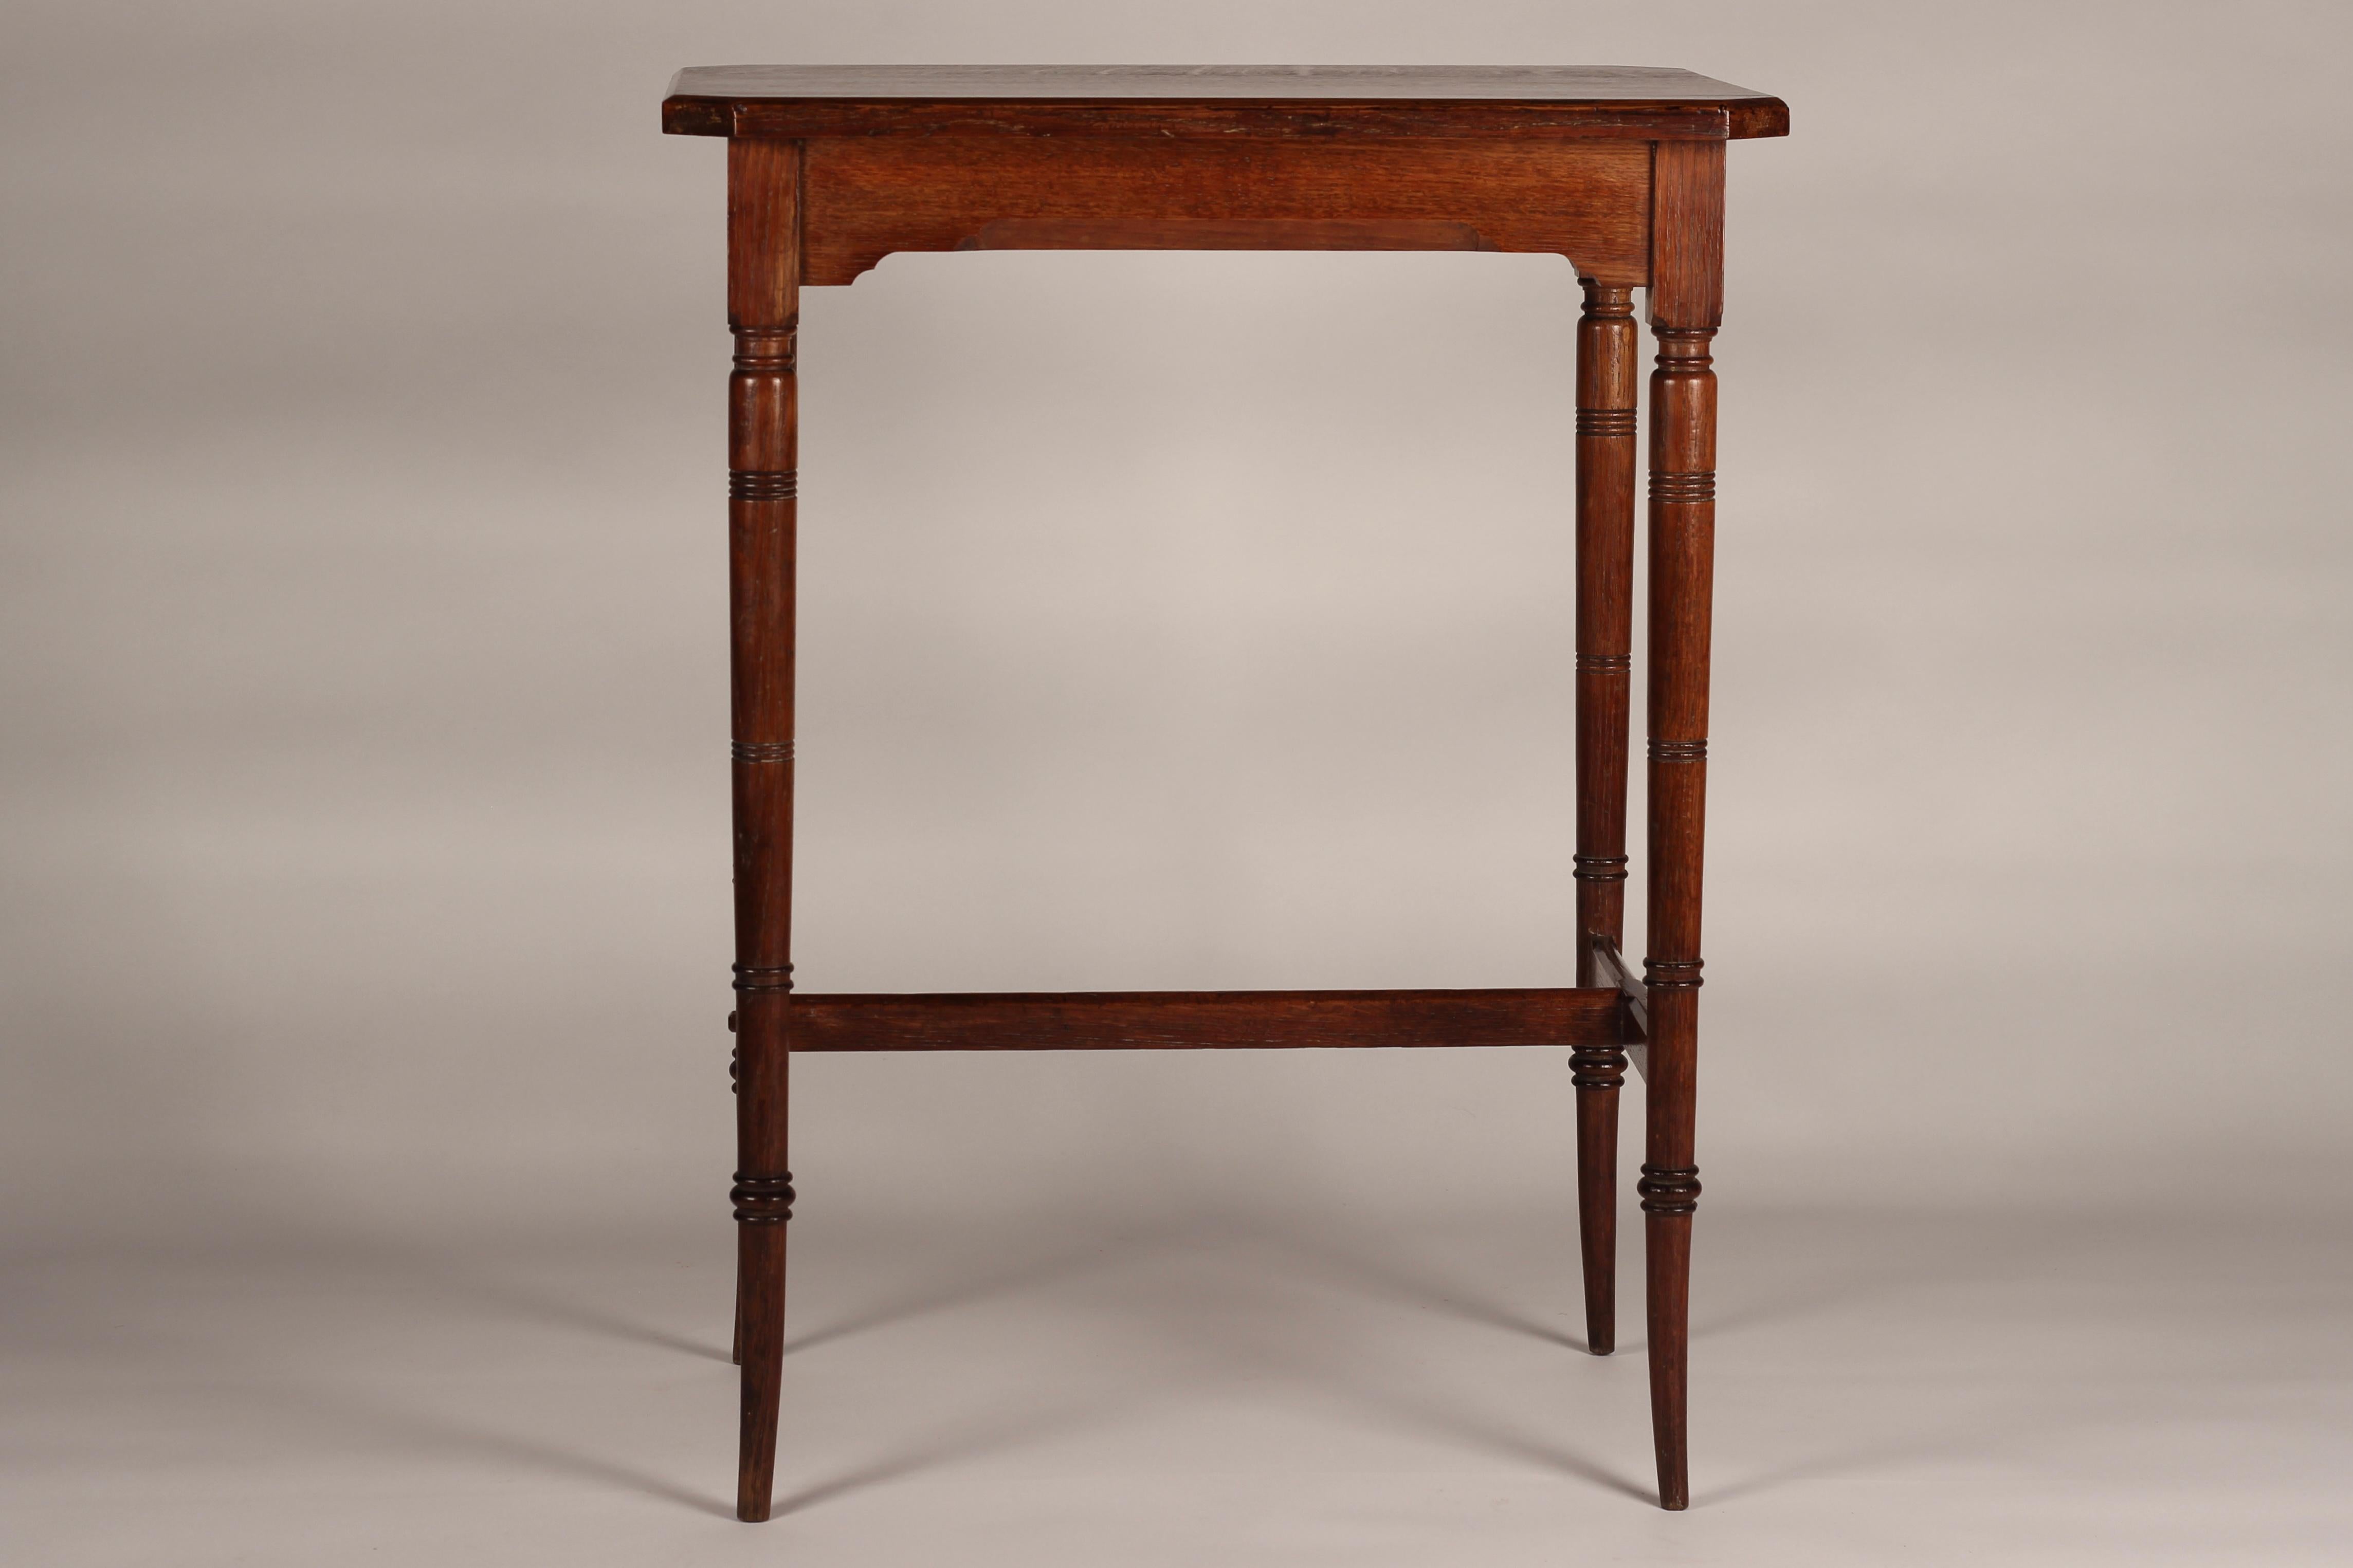 A Victorian Aesthetic movement oak side table or occasional table, beautifully detailed, proportioned and crafted in the style of Edward William Godwin, inspired and influenced by Japan and China with reference to faux Bamboo on the saber style